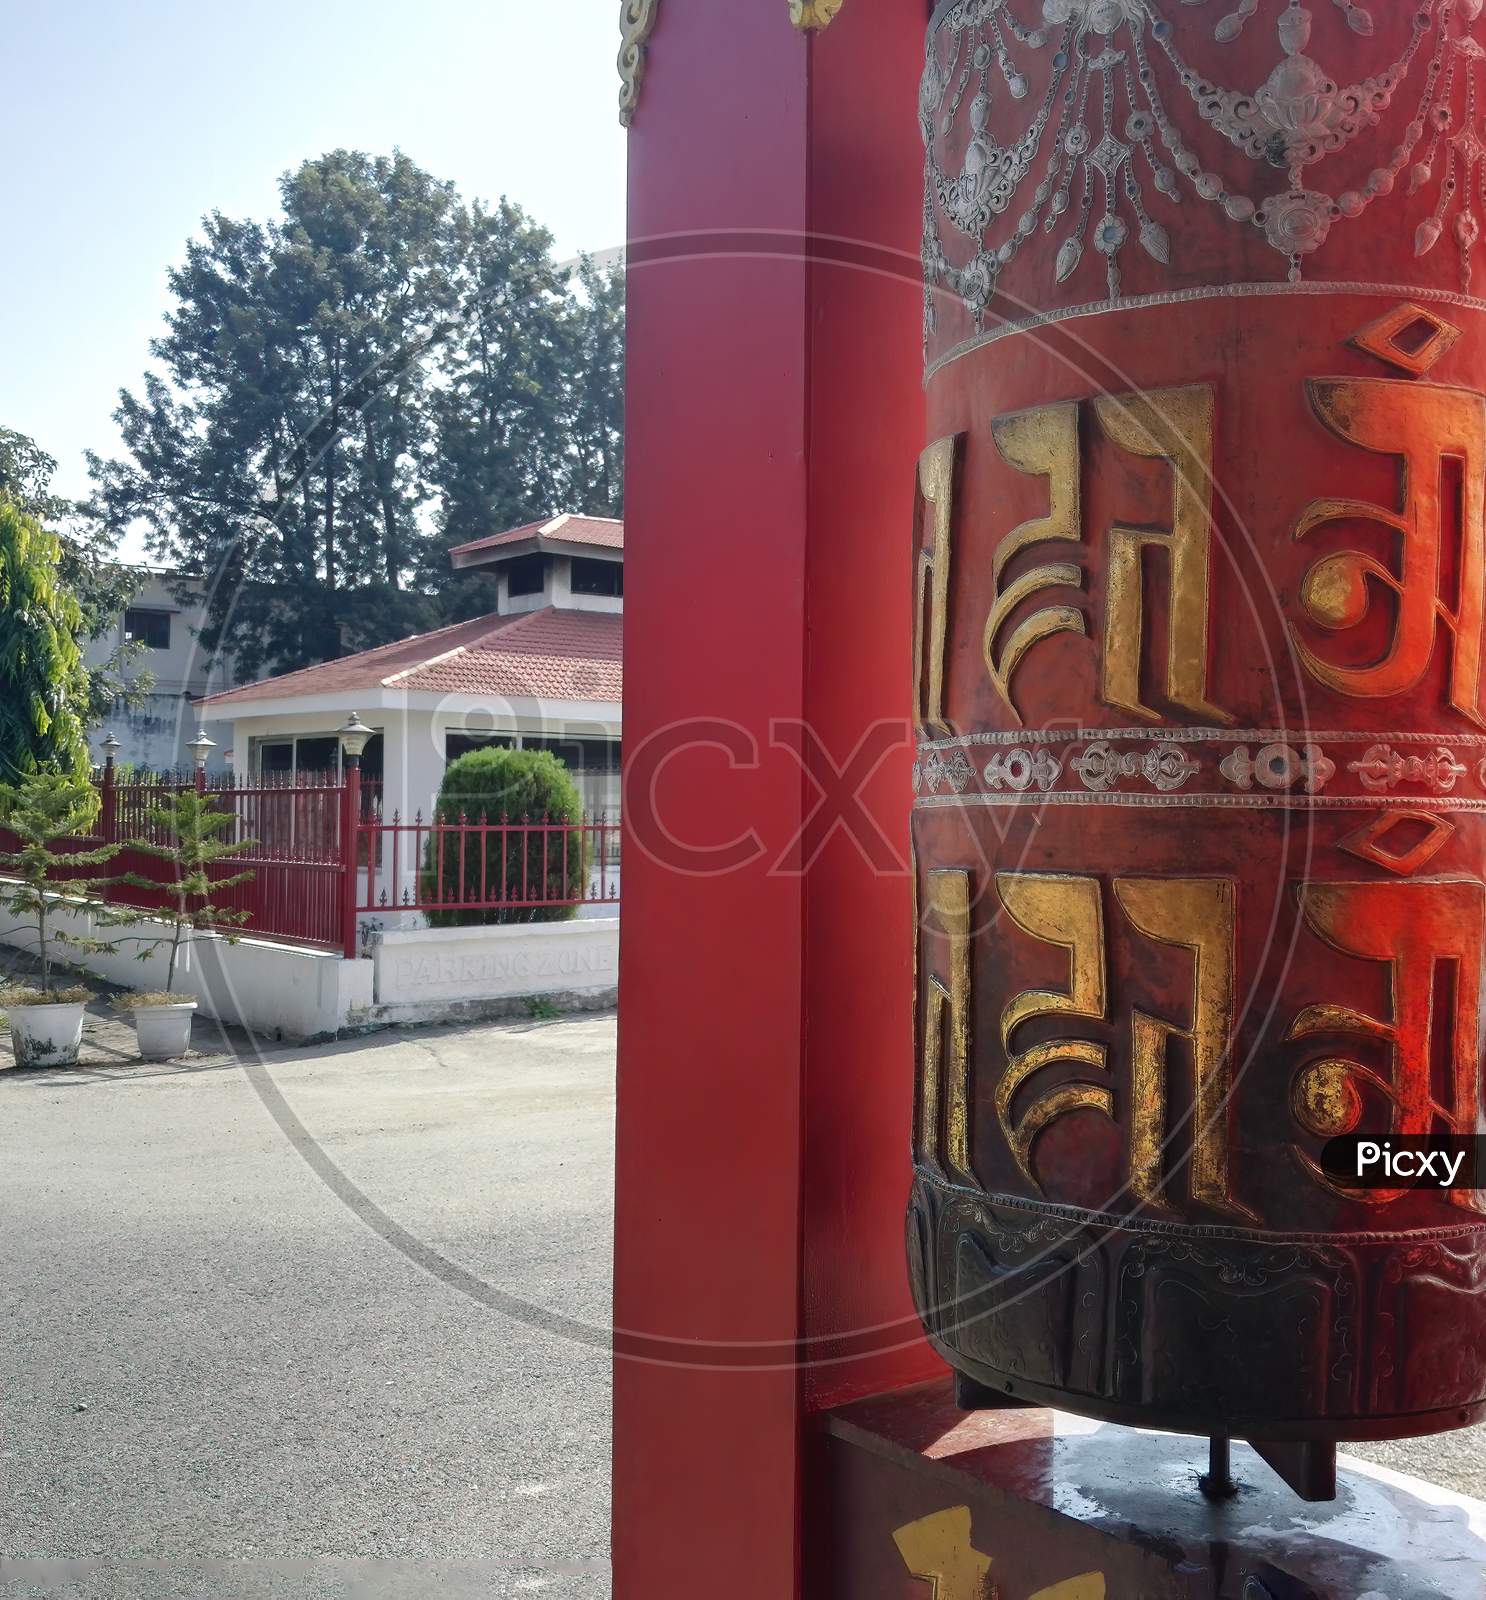 Dehradun, India: Prayer Wheel With Bell With Language Of Tibetan, A Cylindrical Wheel, Mantra Om Mani Padme Hum , Vertical Image, Uttrakhand